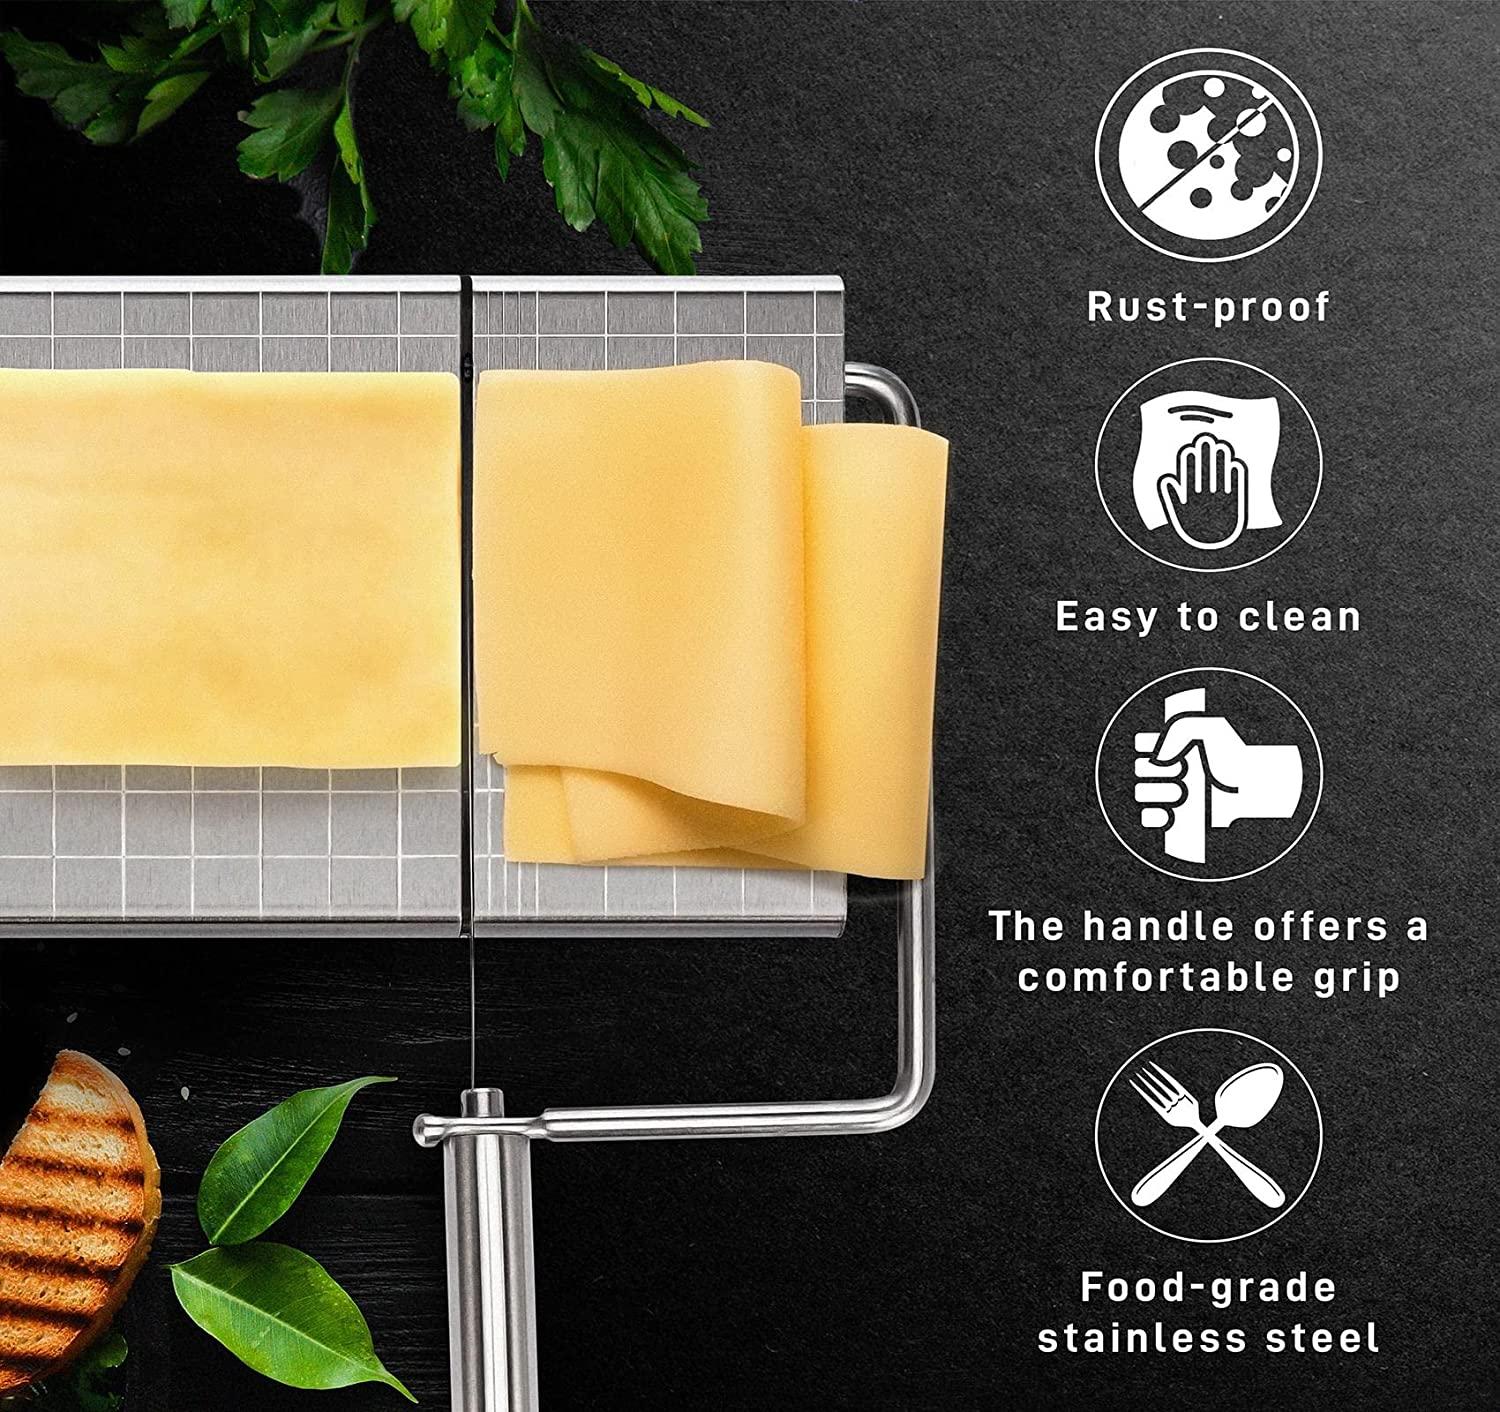 Solid Birch Large Wire Cheese Slicing Board Cheese Slicer Measures